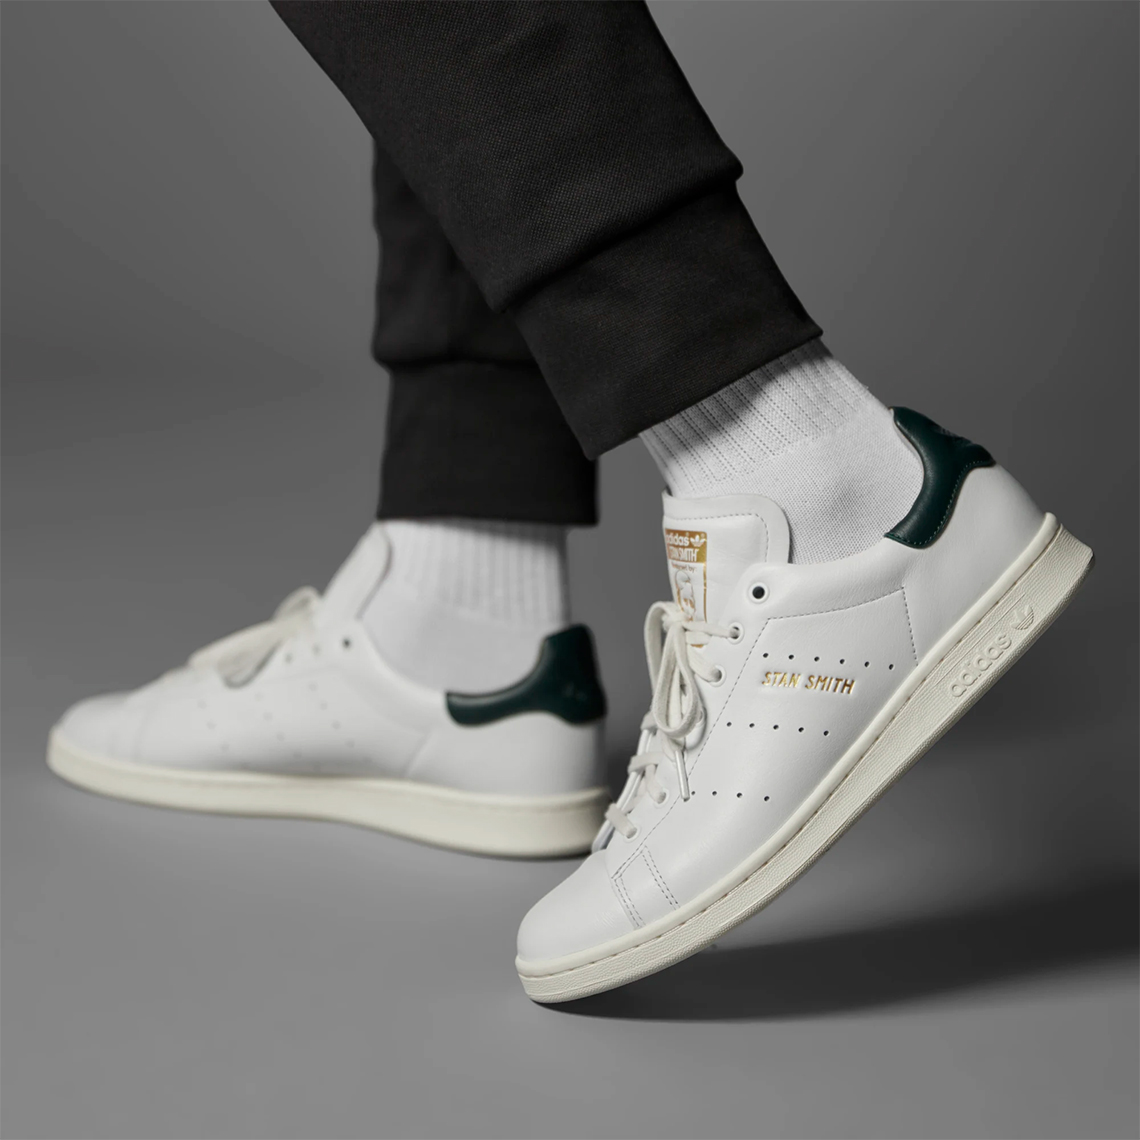 Kilometers Herself scheme adidas Presents The Stan Smith Lux With Buttery Leathers - SneakerNews.com